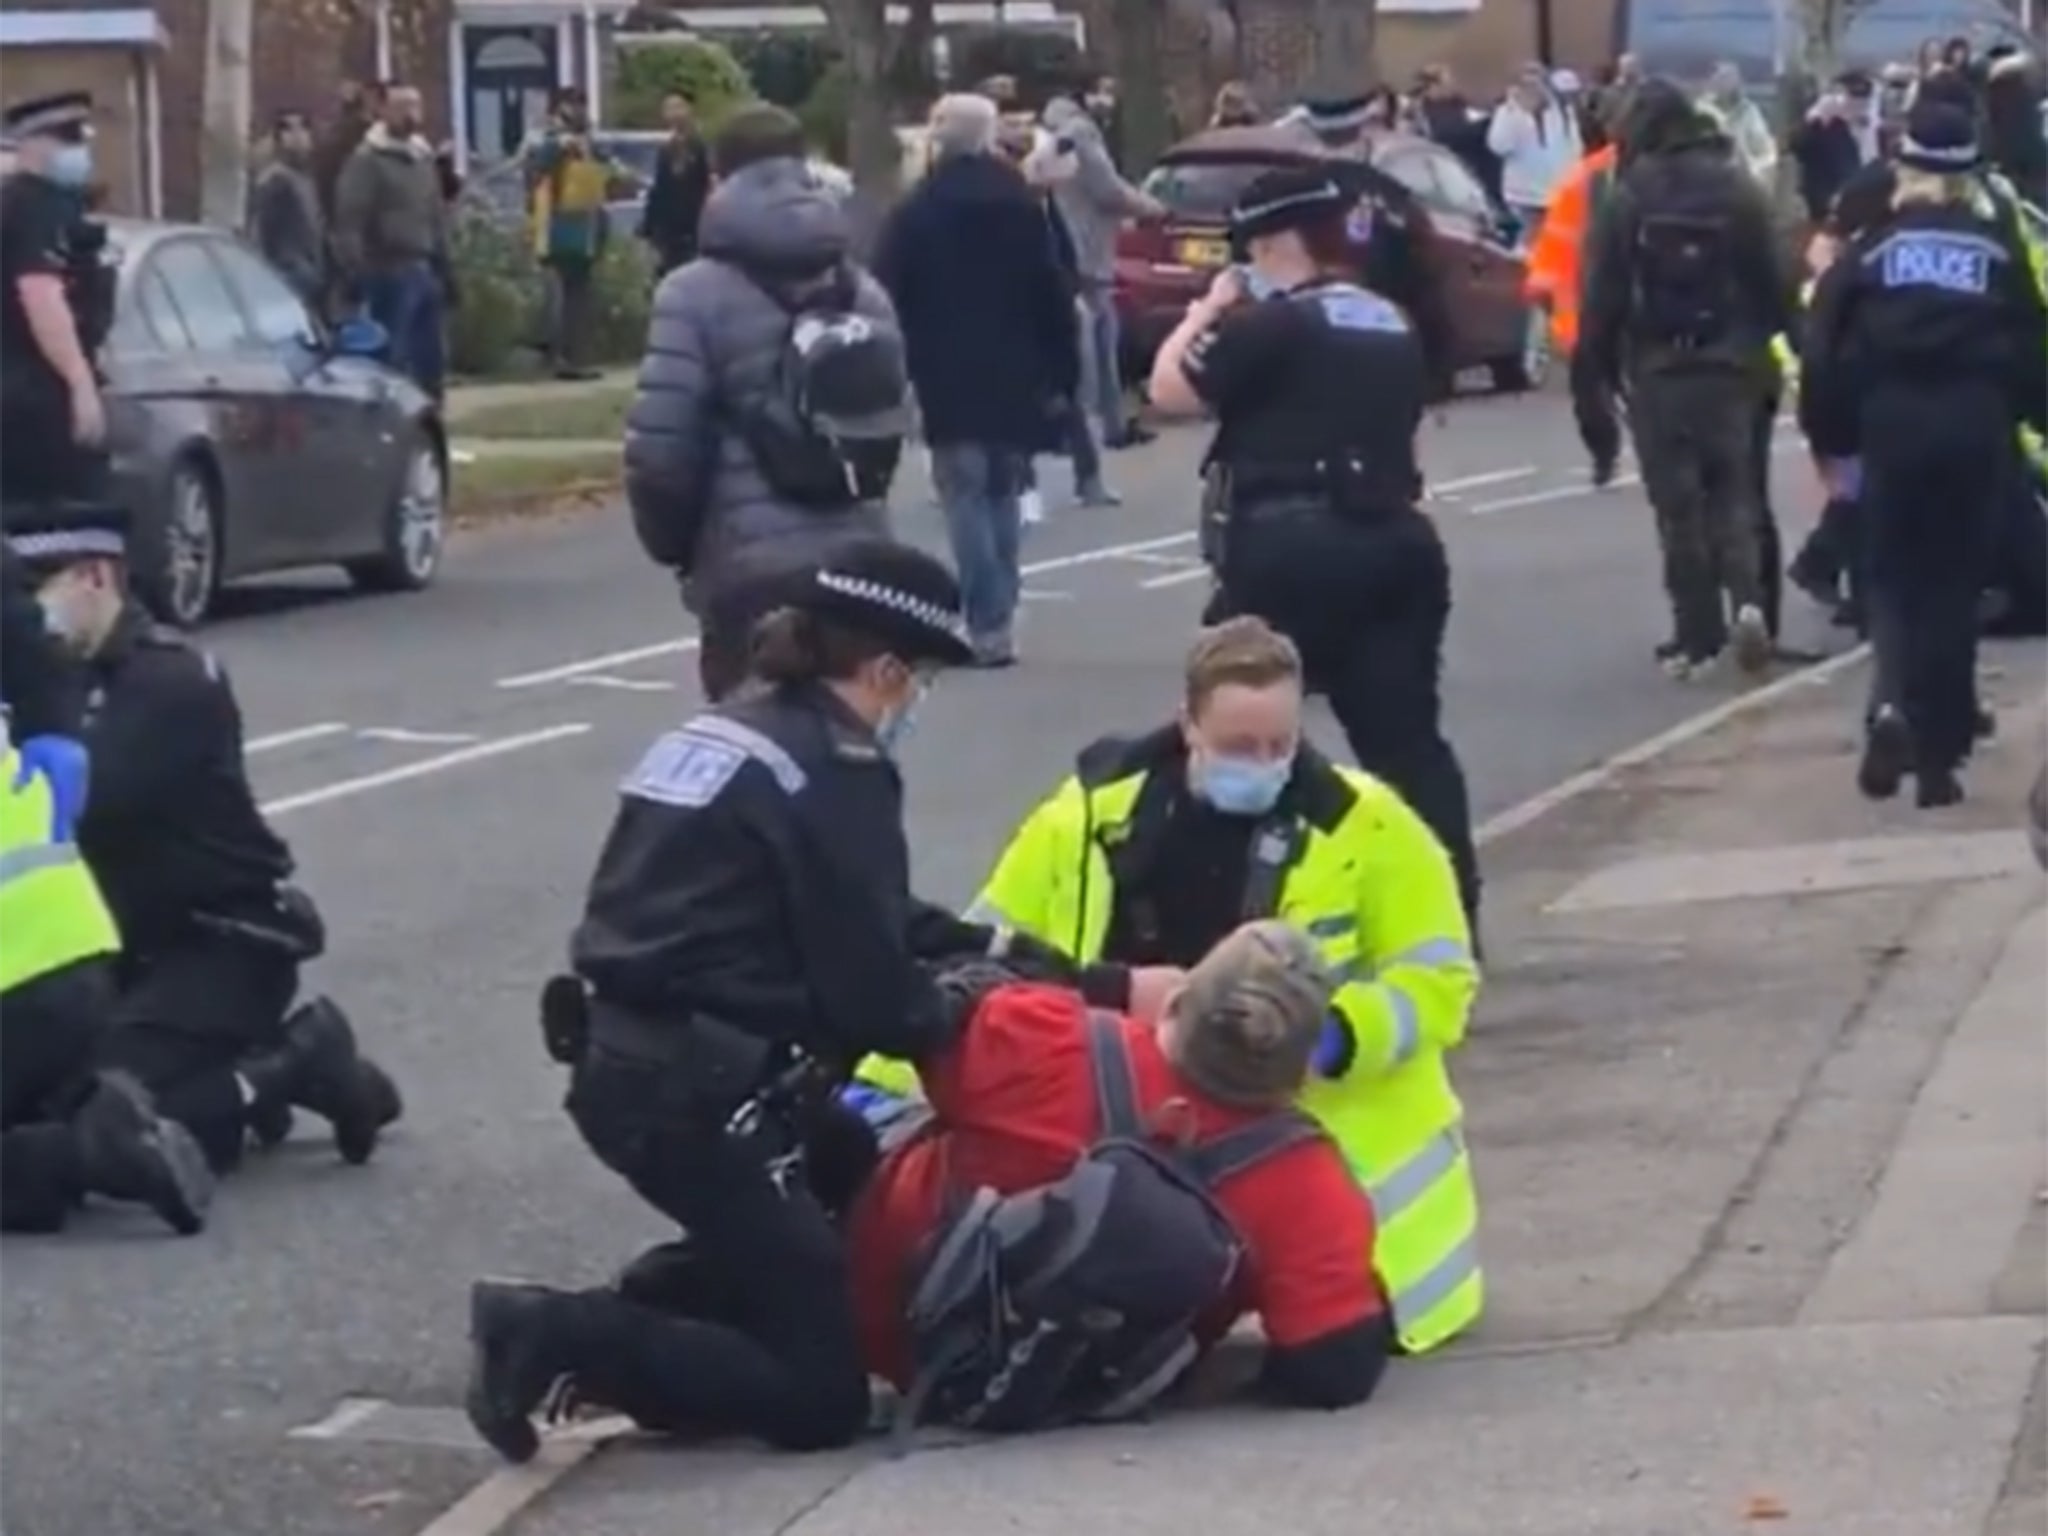 Anti-lockdown protesters were arrested by police in Basildon yesterday afternoon.